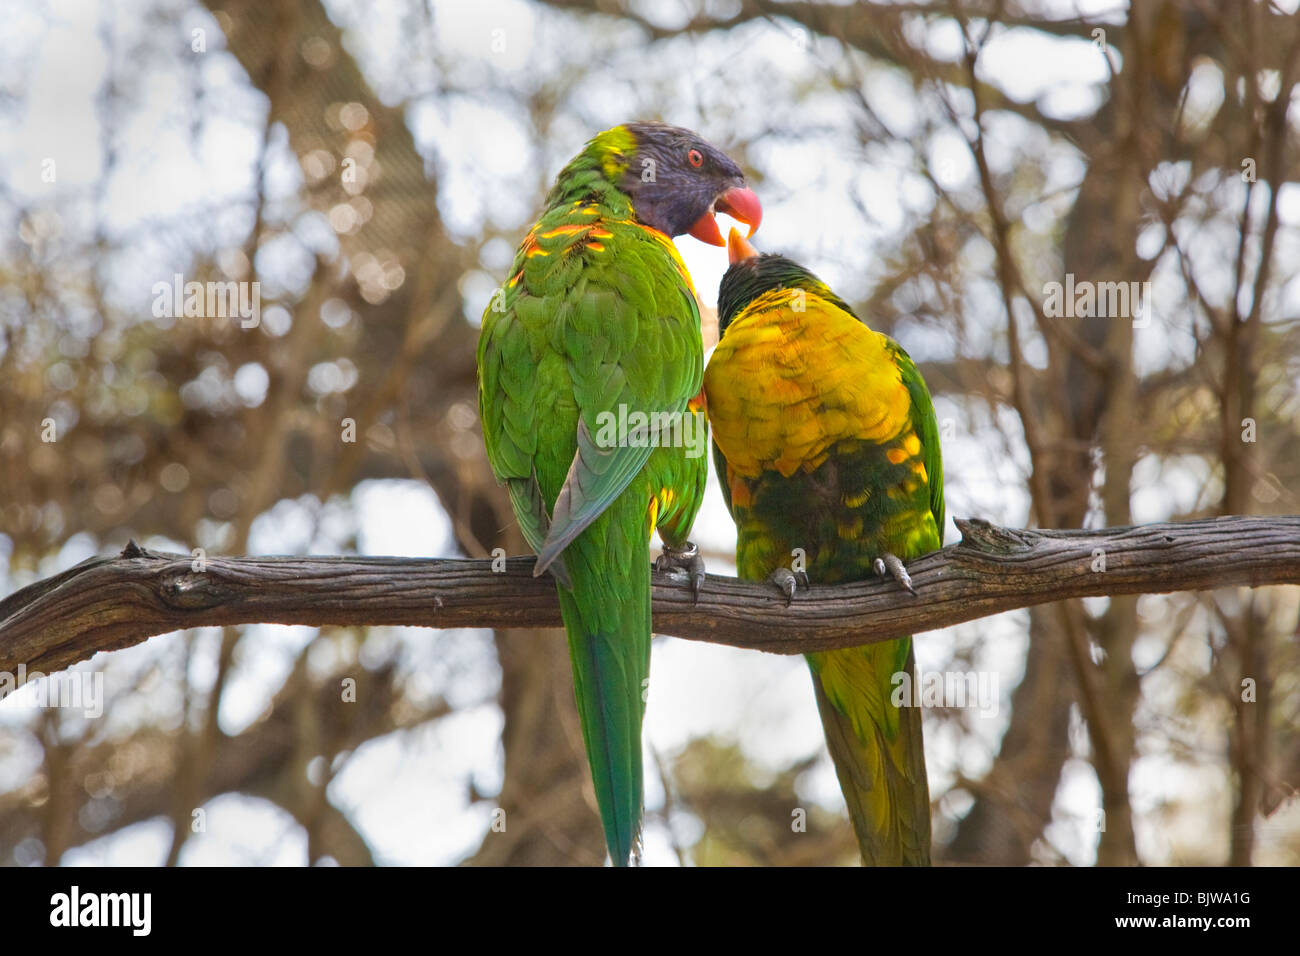 Pair of colorful tropical birds at Busch Gardens in Tampa Florida Stock Photo